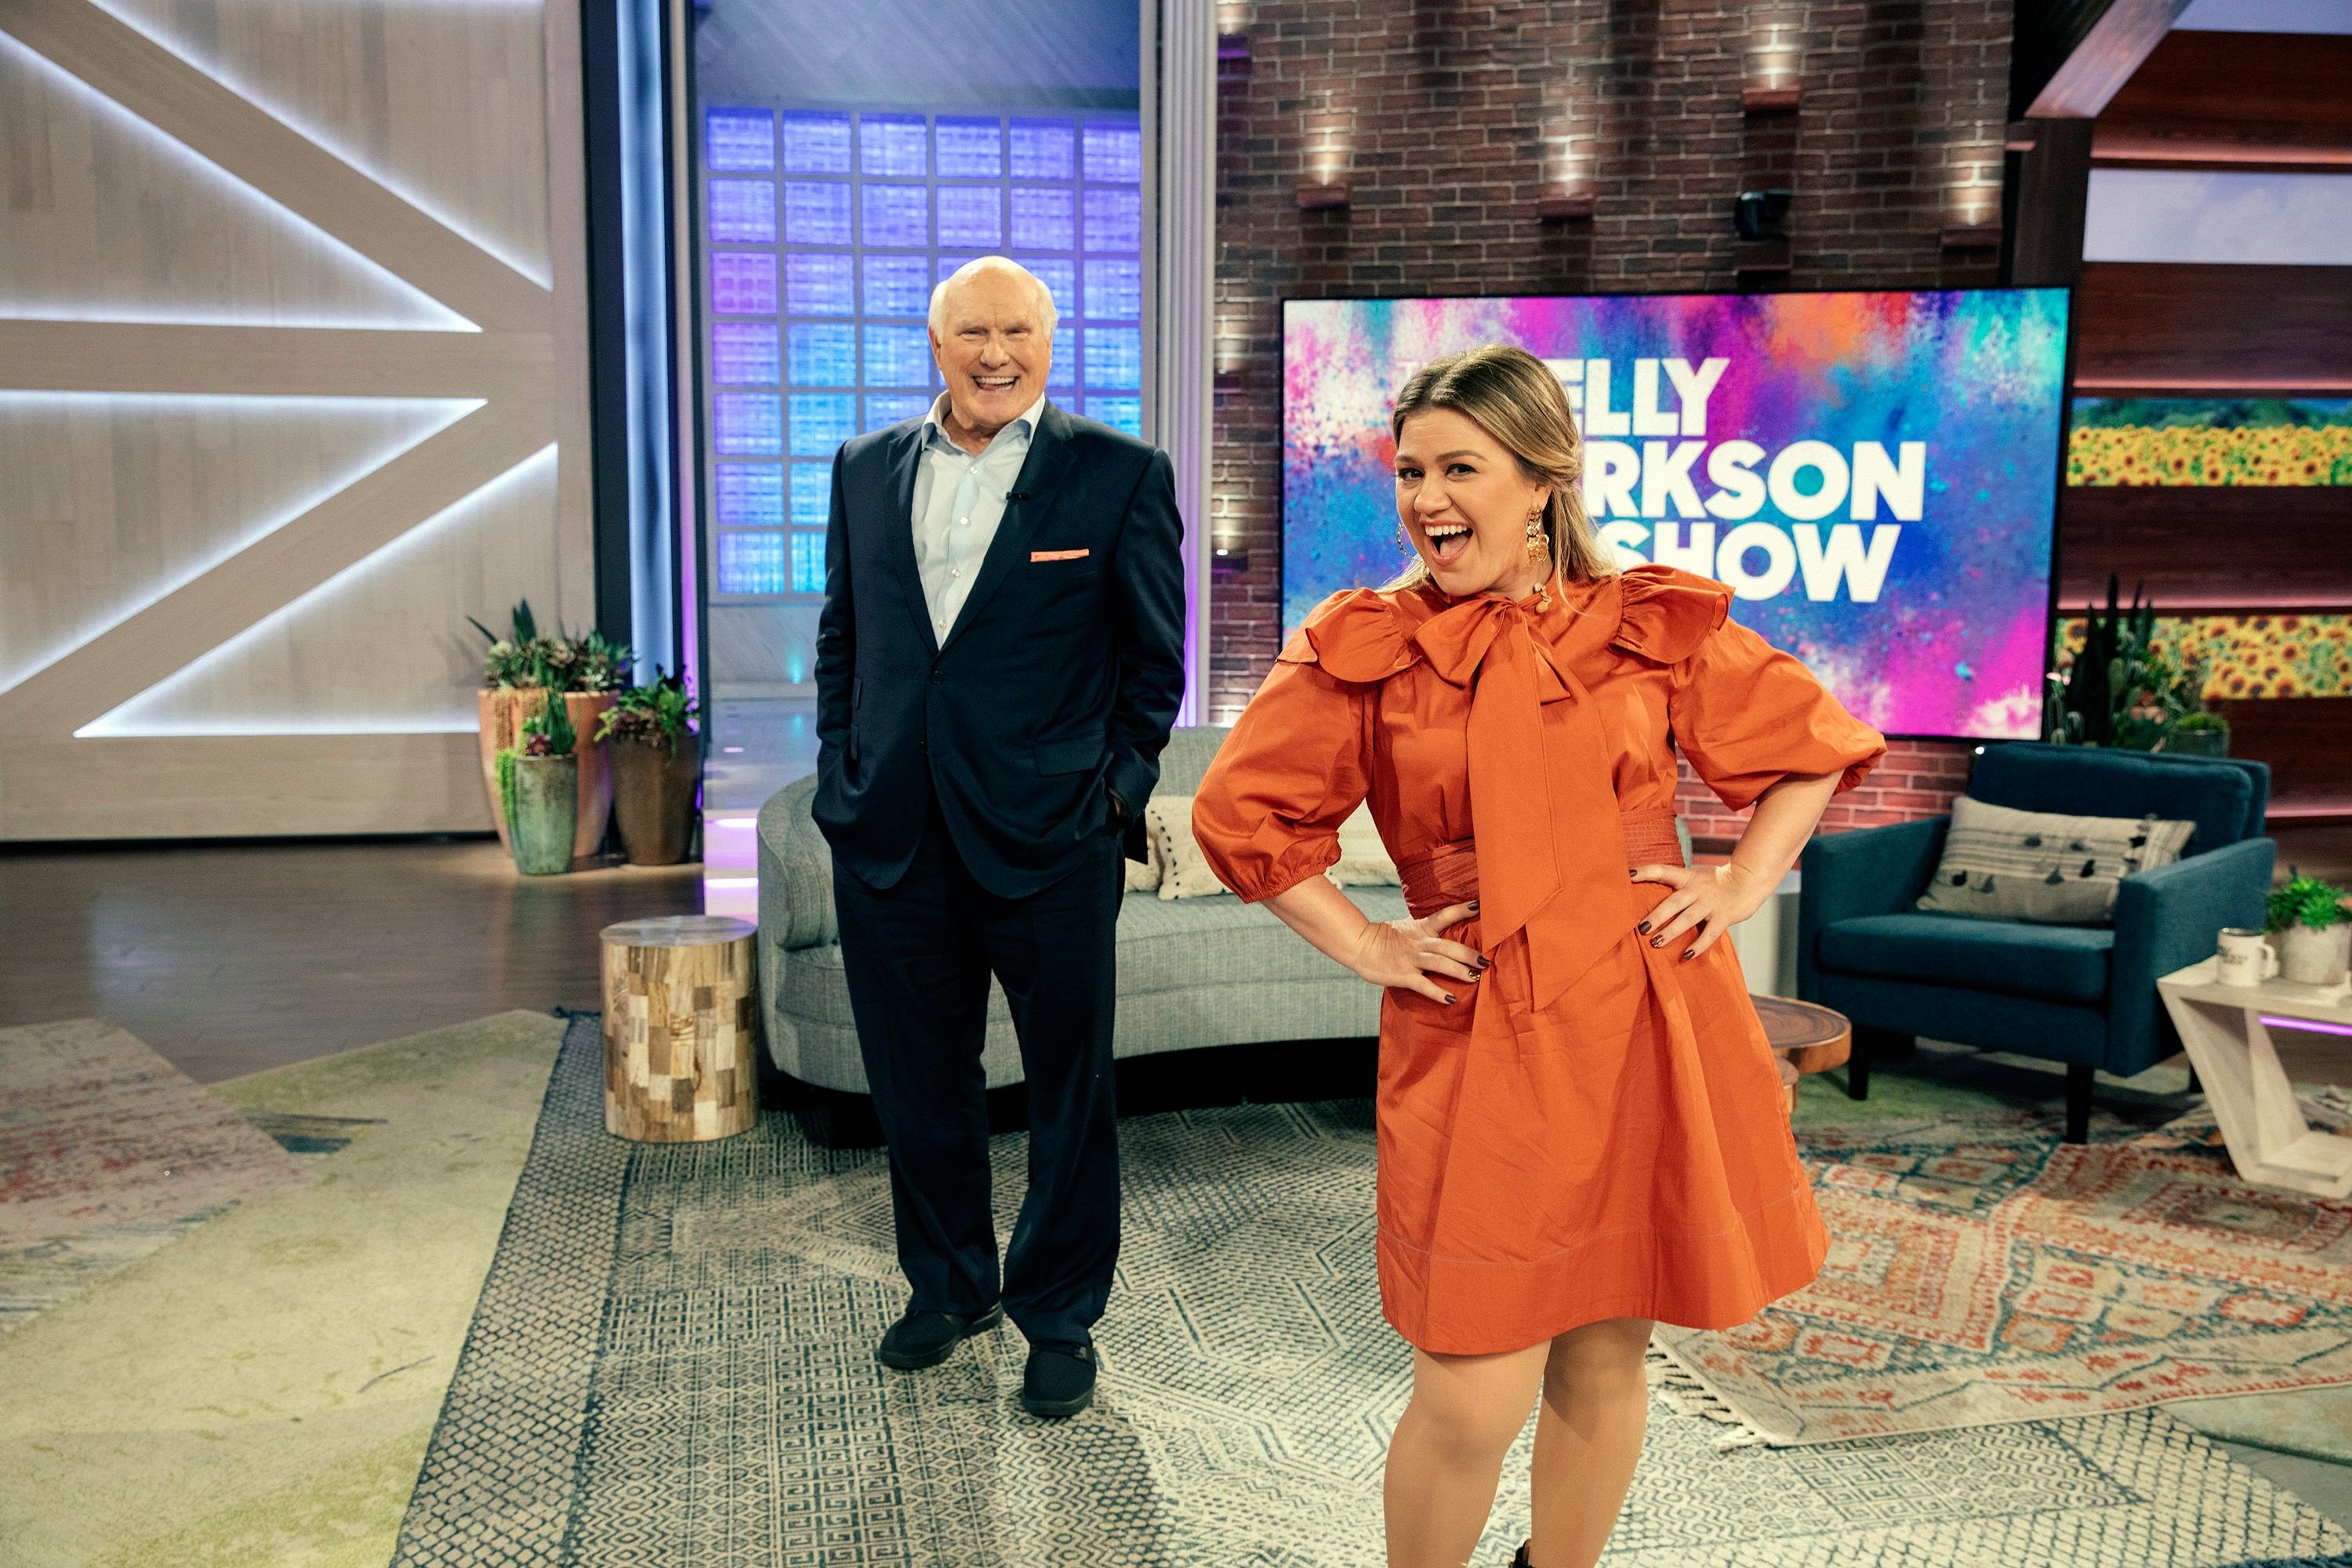 Kelly Clarkson and Terry Bradshaw on season 2 of "The Kelly Clarkson Show" on October 30, 2020 | Photo: Weiss Eubanks/NBCUniversal/NBCU Photo Bank/Getty Images